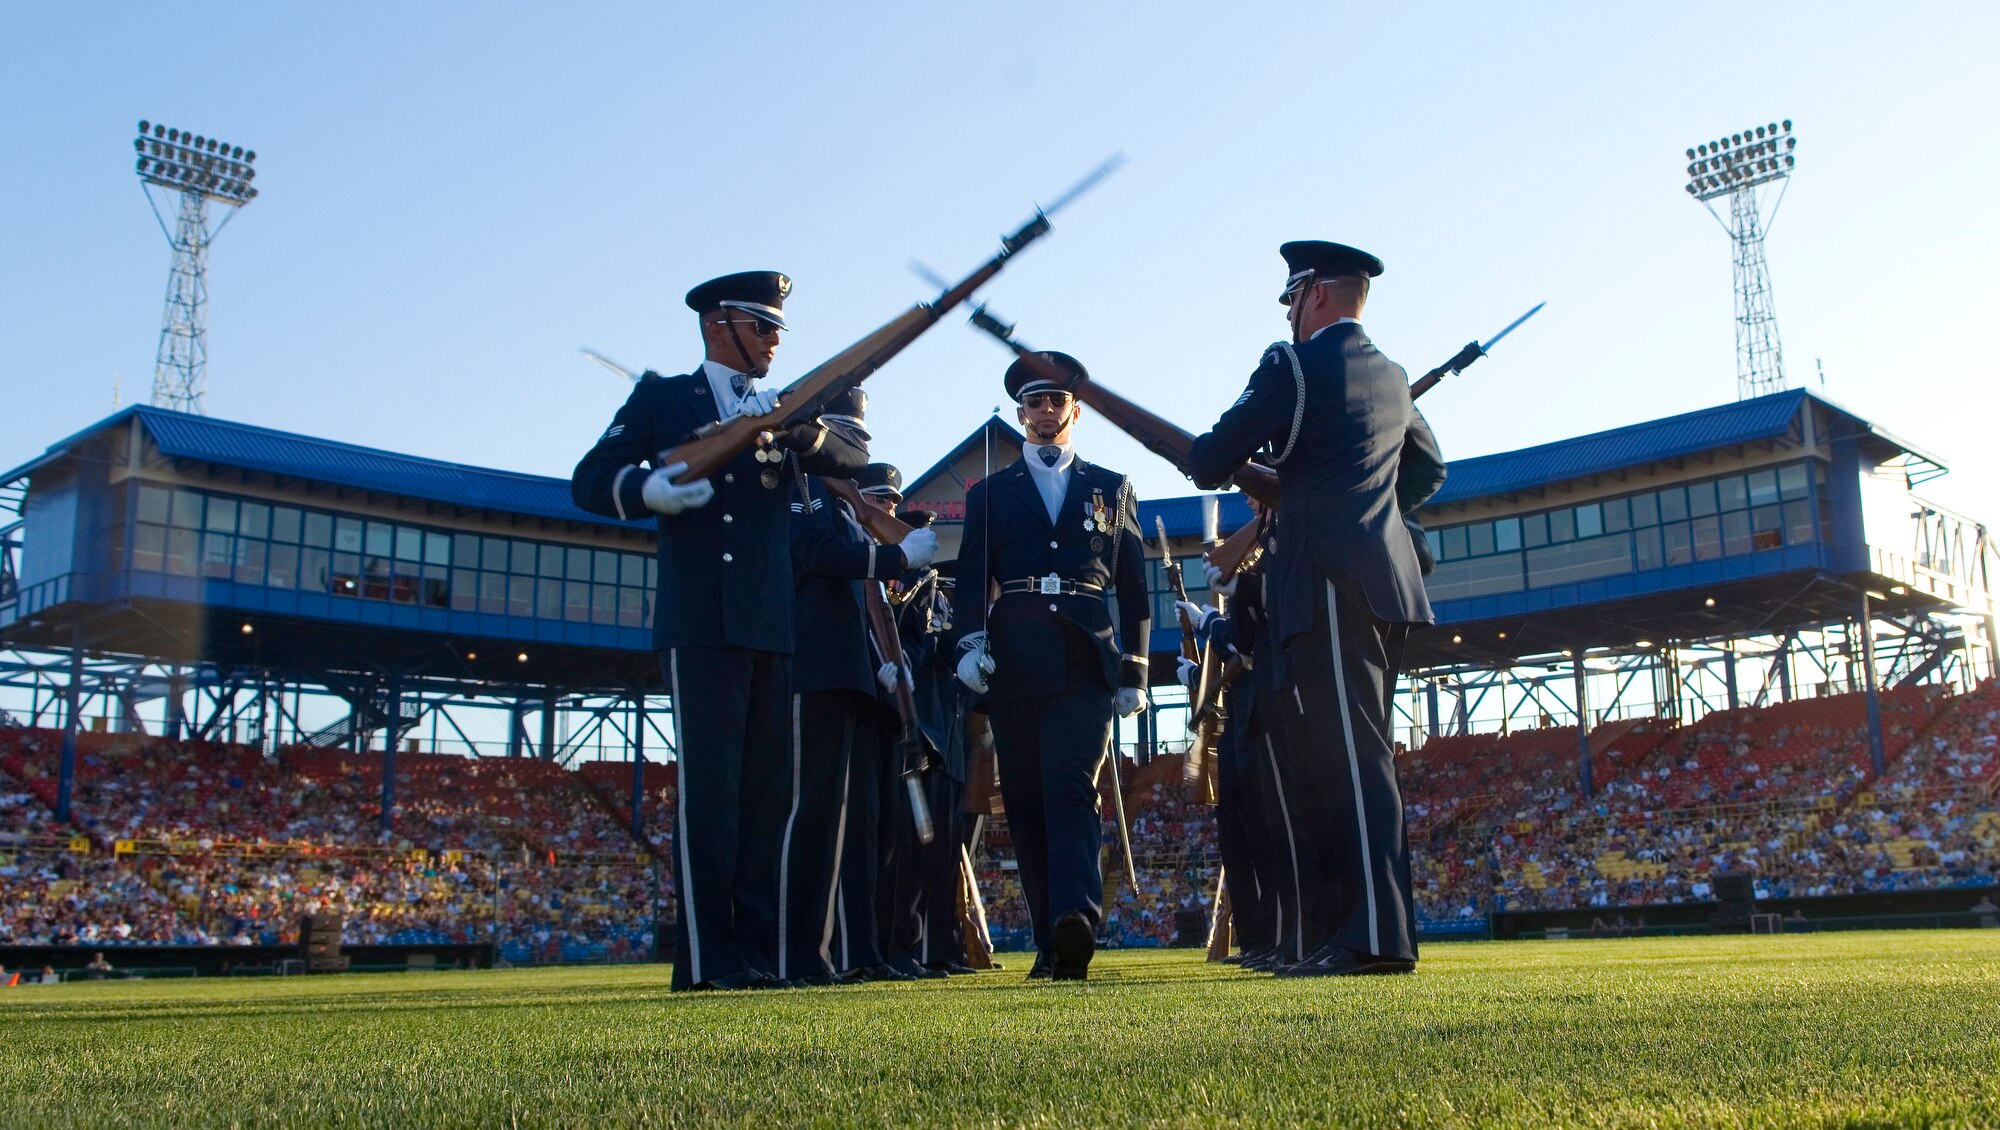 The Air Force Honor Guard drill team performs for approximately 10,000 spectators during the opening ceremonies of Air Force Week in the Heartland Aug. 9 at Rosenblatt Stadium in Omaha, Neb. The week is designed to broaden awareness of the Air Force's role in the war on terrorism and strengthen support for Airmen serving worldwide in defense of freedom. (U.S. Air Force photo/Staff Sgt. Bennie J. Davis III)